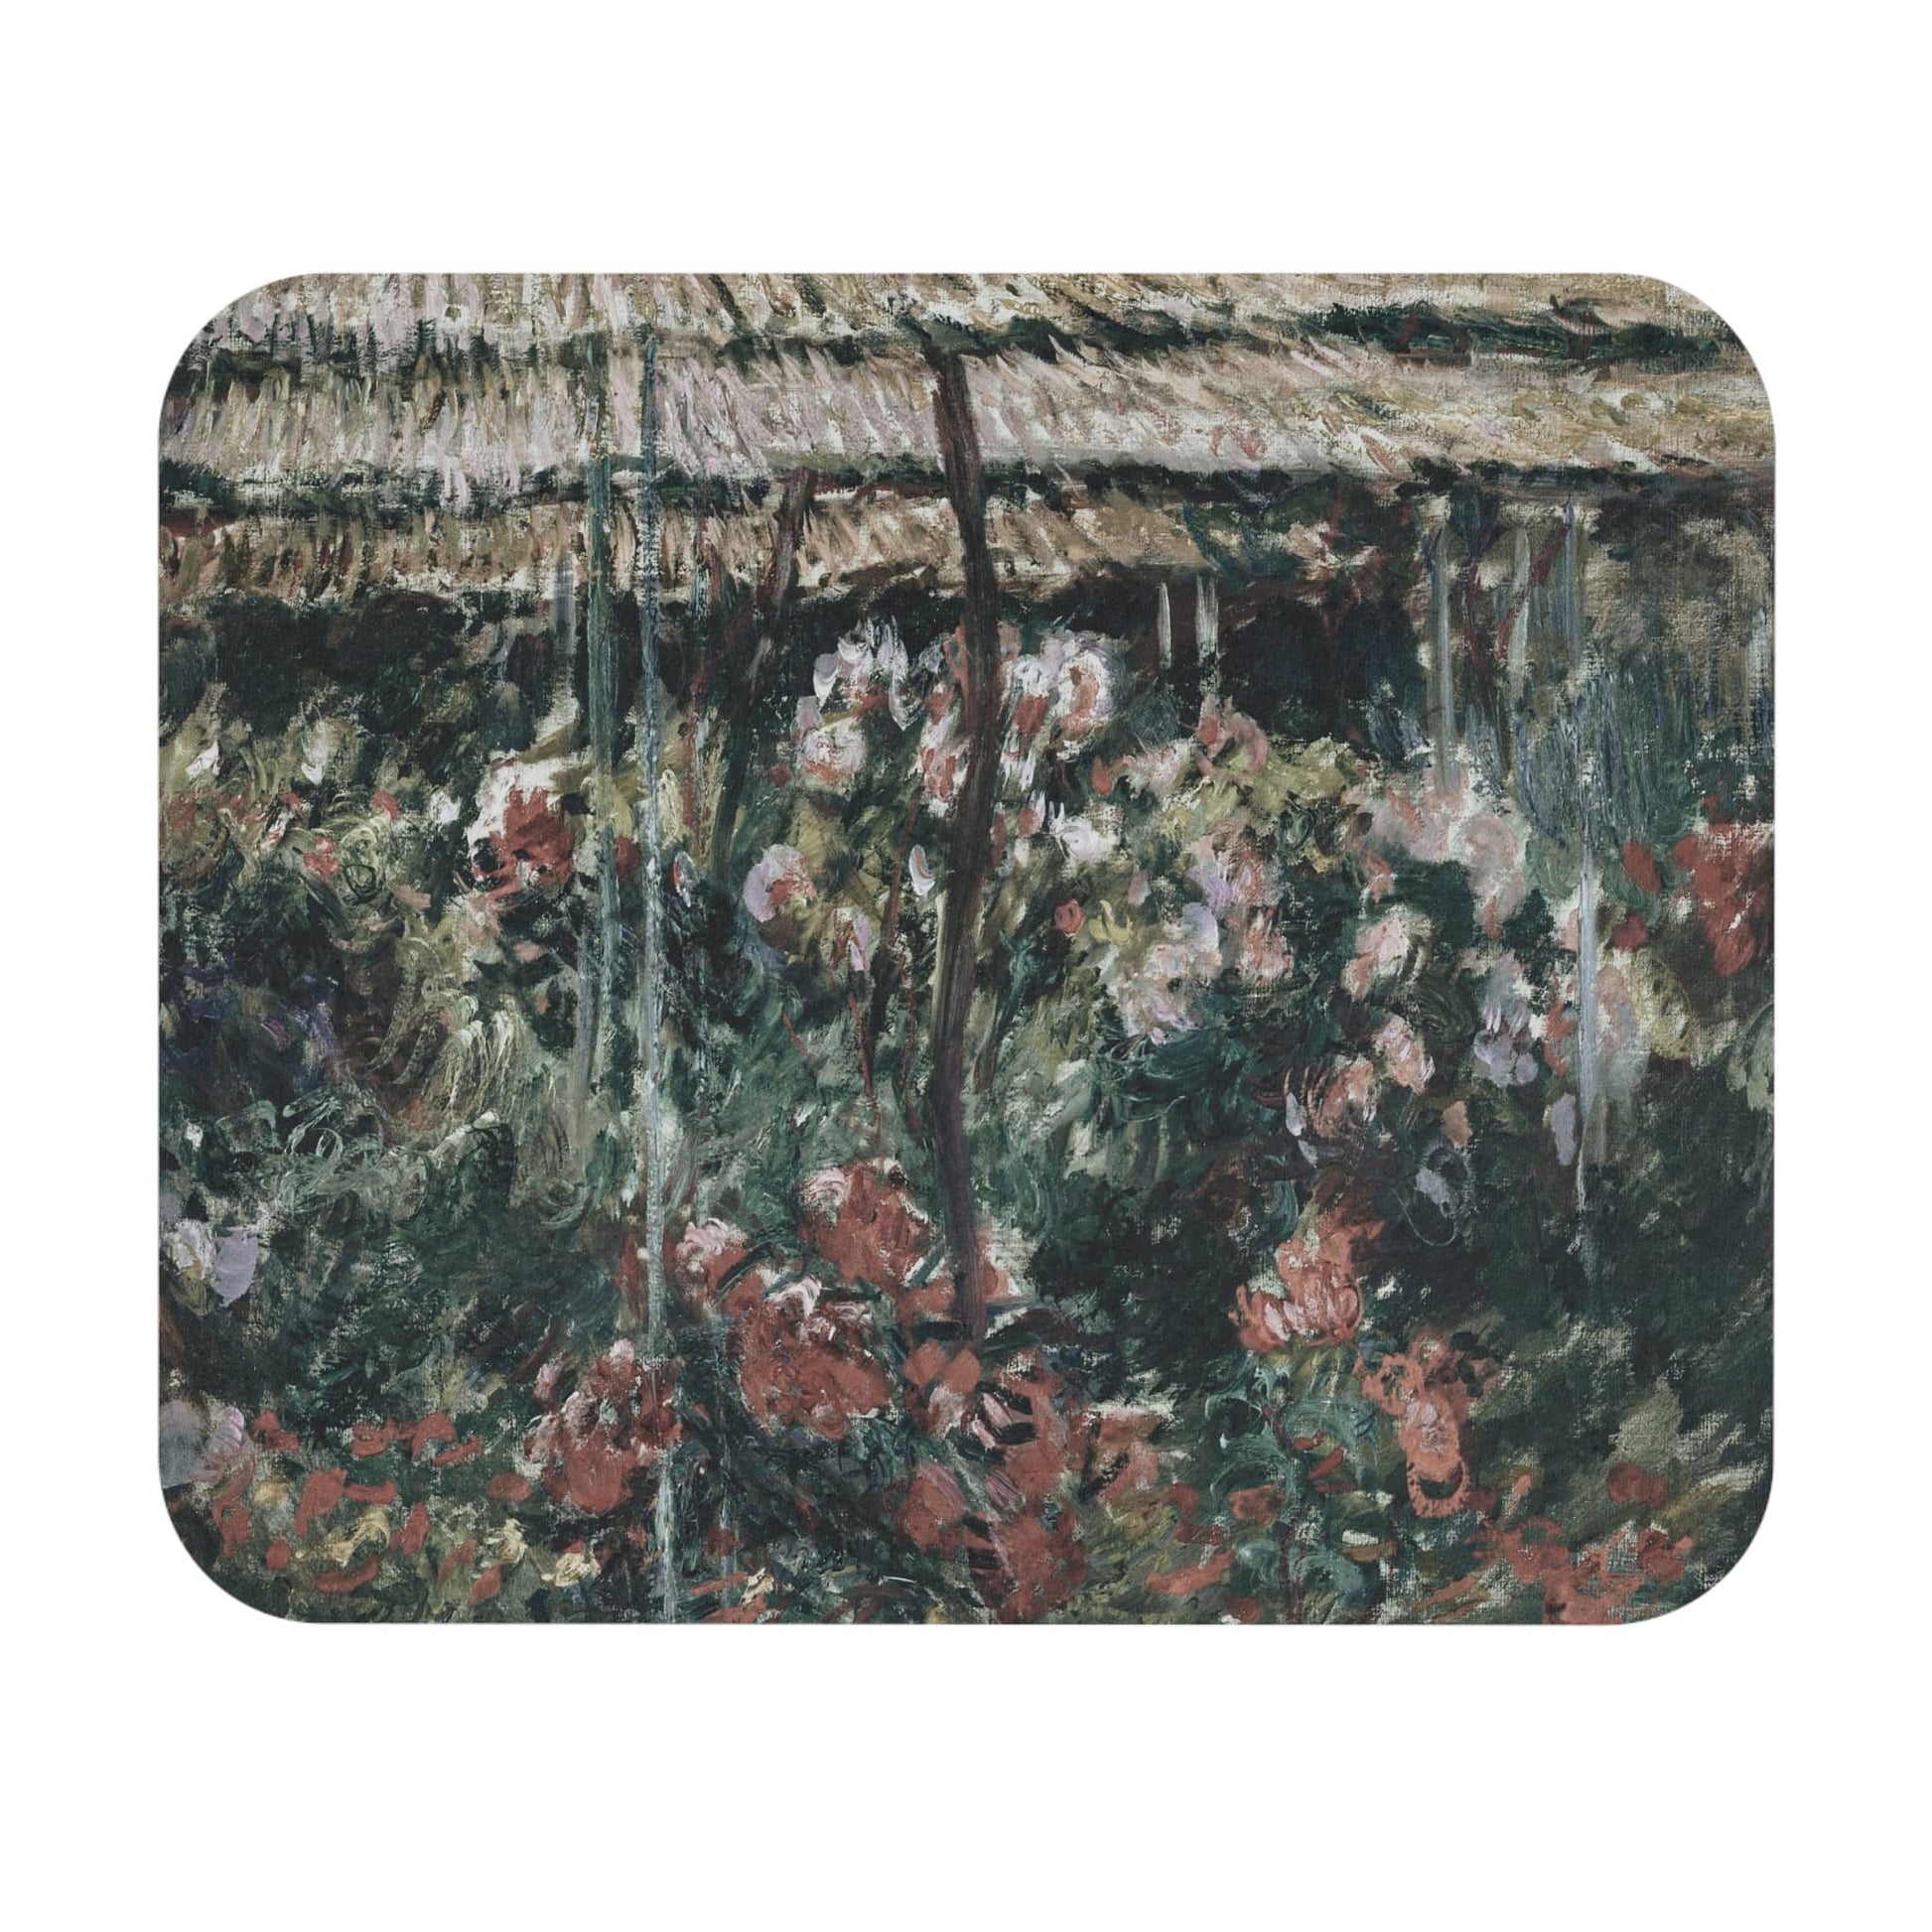 Muted Flowers Mouse Pad featuring a tranquil peony garden, enhancing desk and office decor.